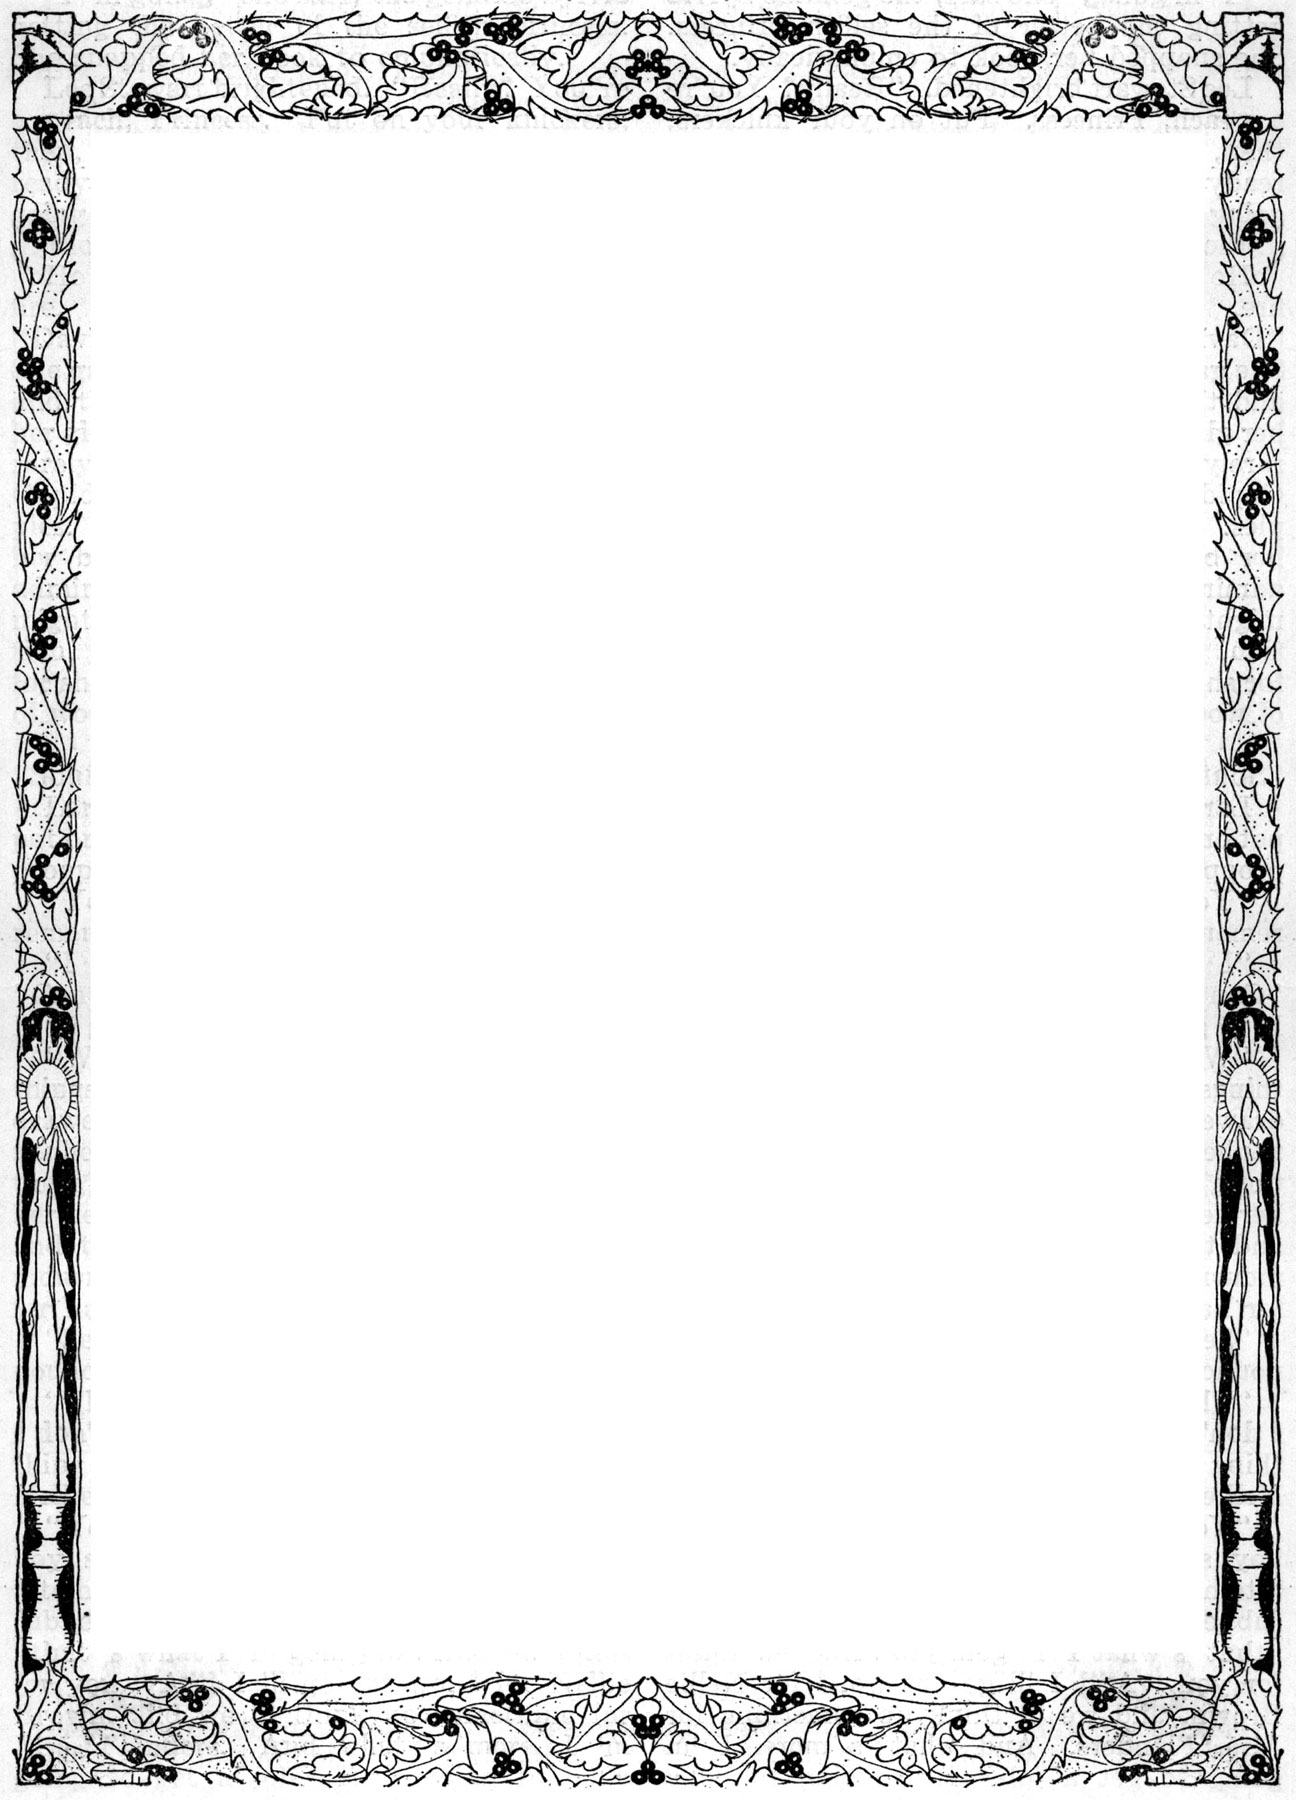 Victorian Page Border - ClipArt Best